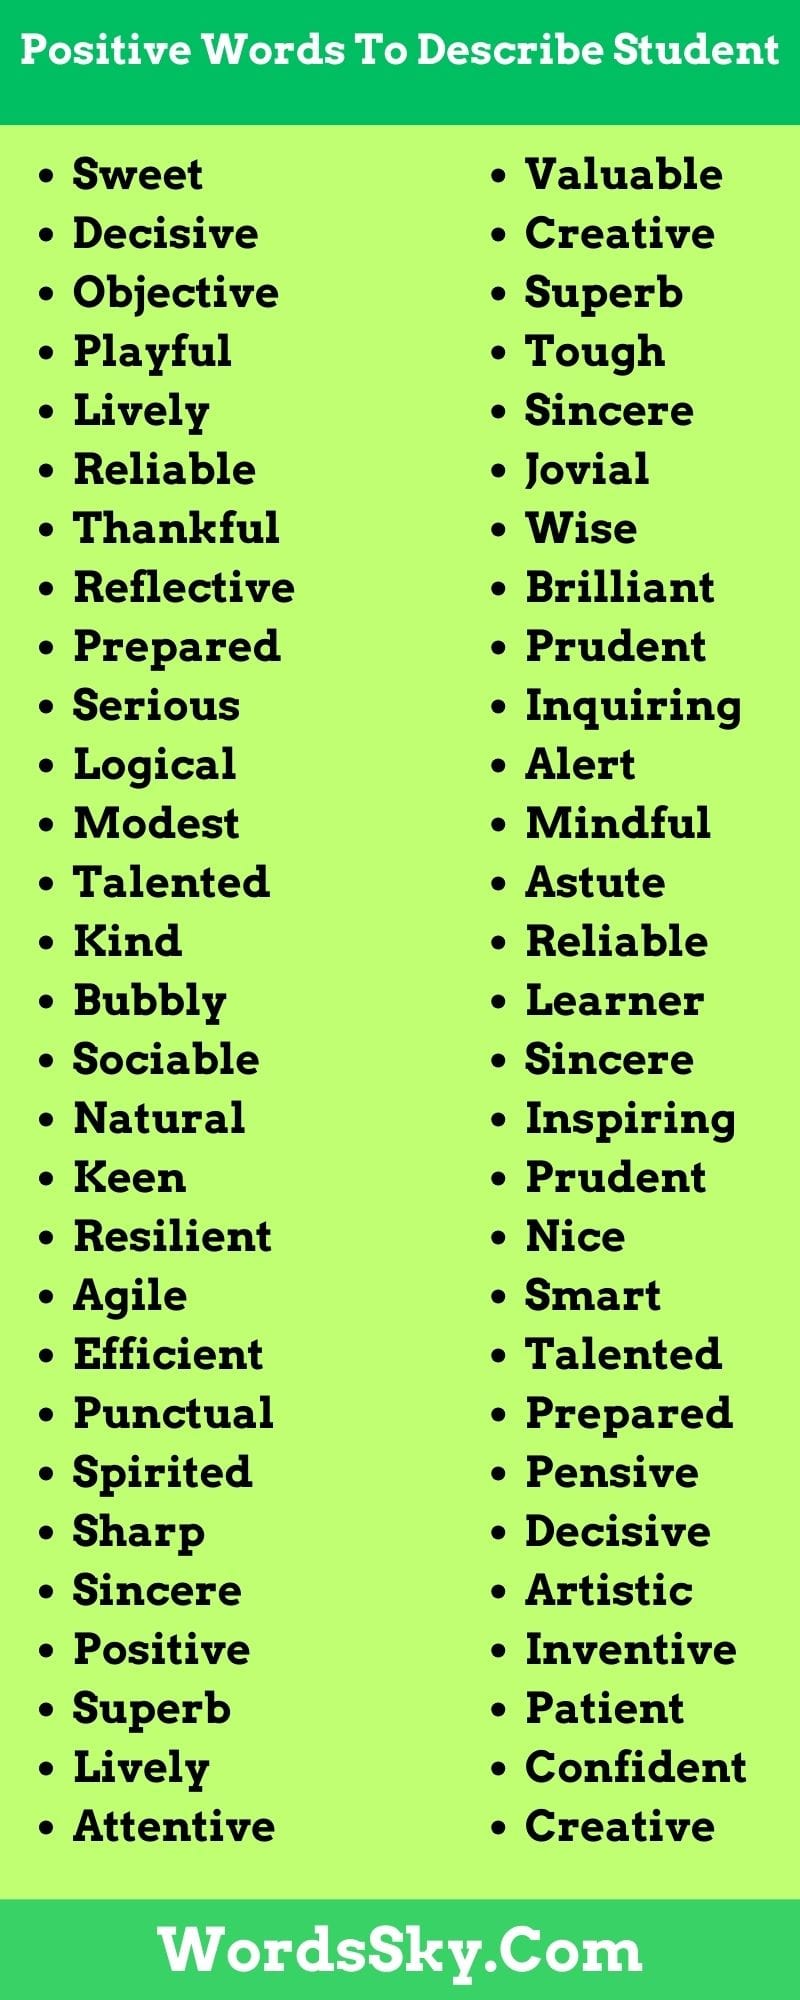 Positive Words To Describe Student